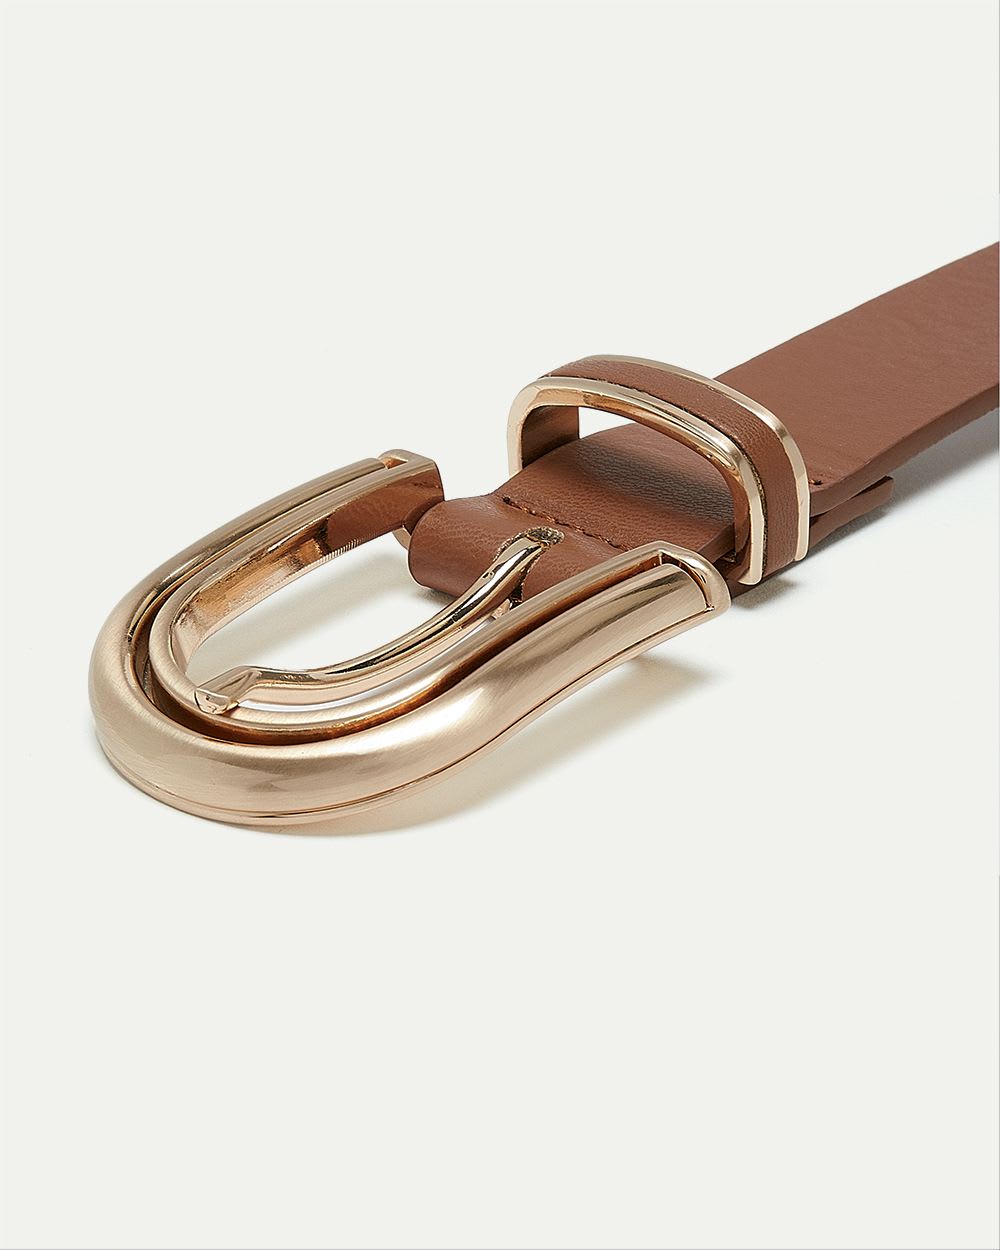 Faux Leather Belt with Brushed Metal Buckle